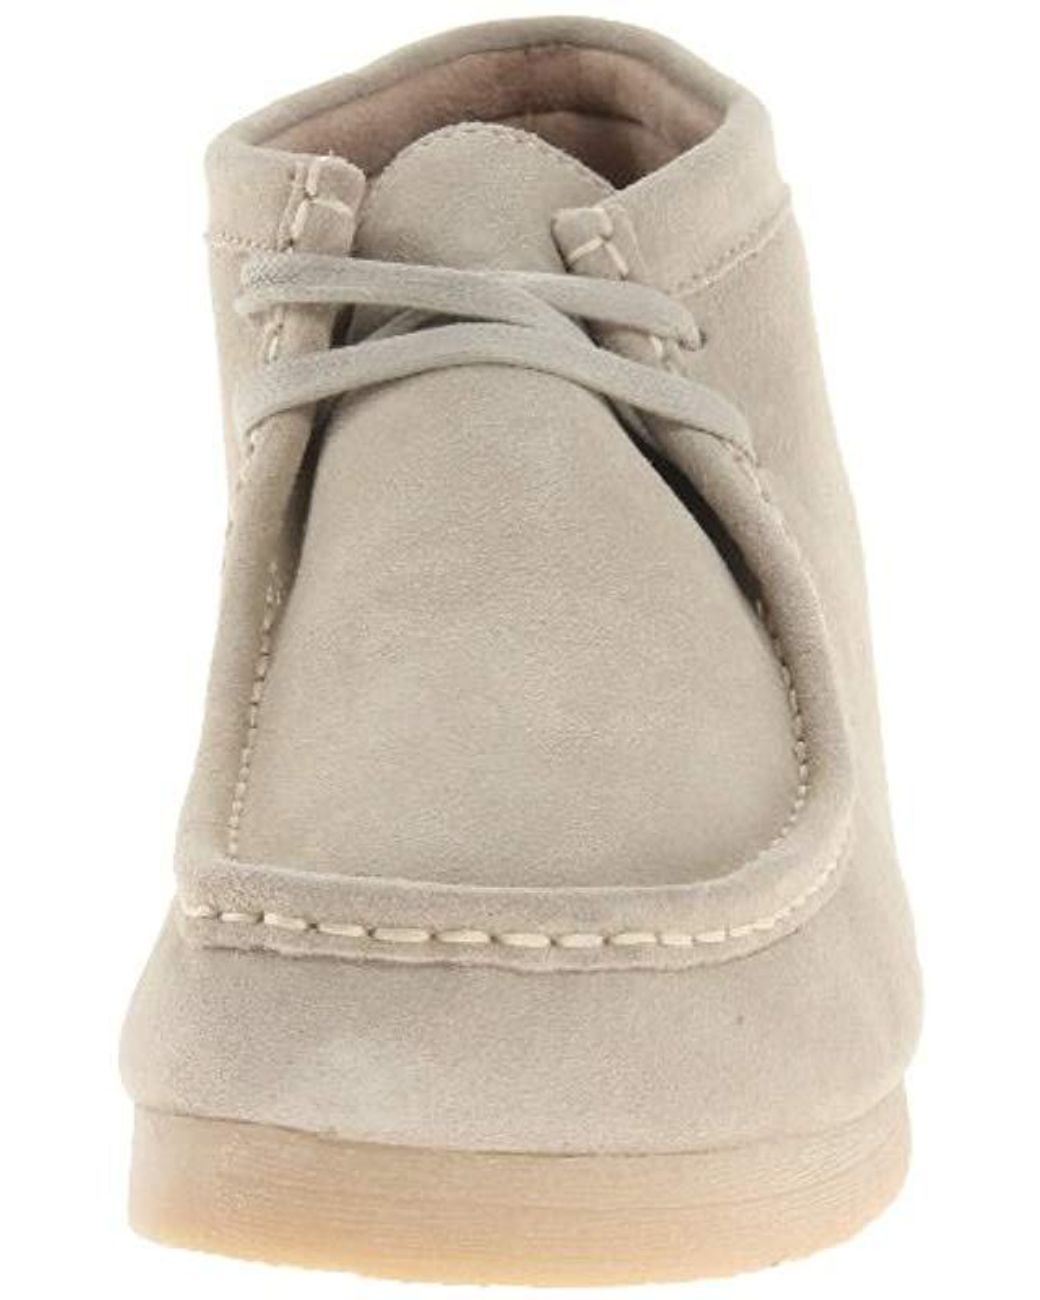 Clarks Stinson Hi Chukka Boot,sand Suede,8 M Us in Natural for